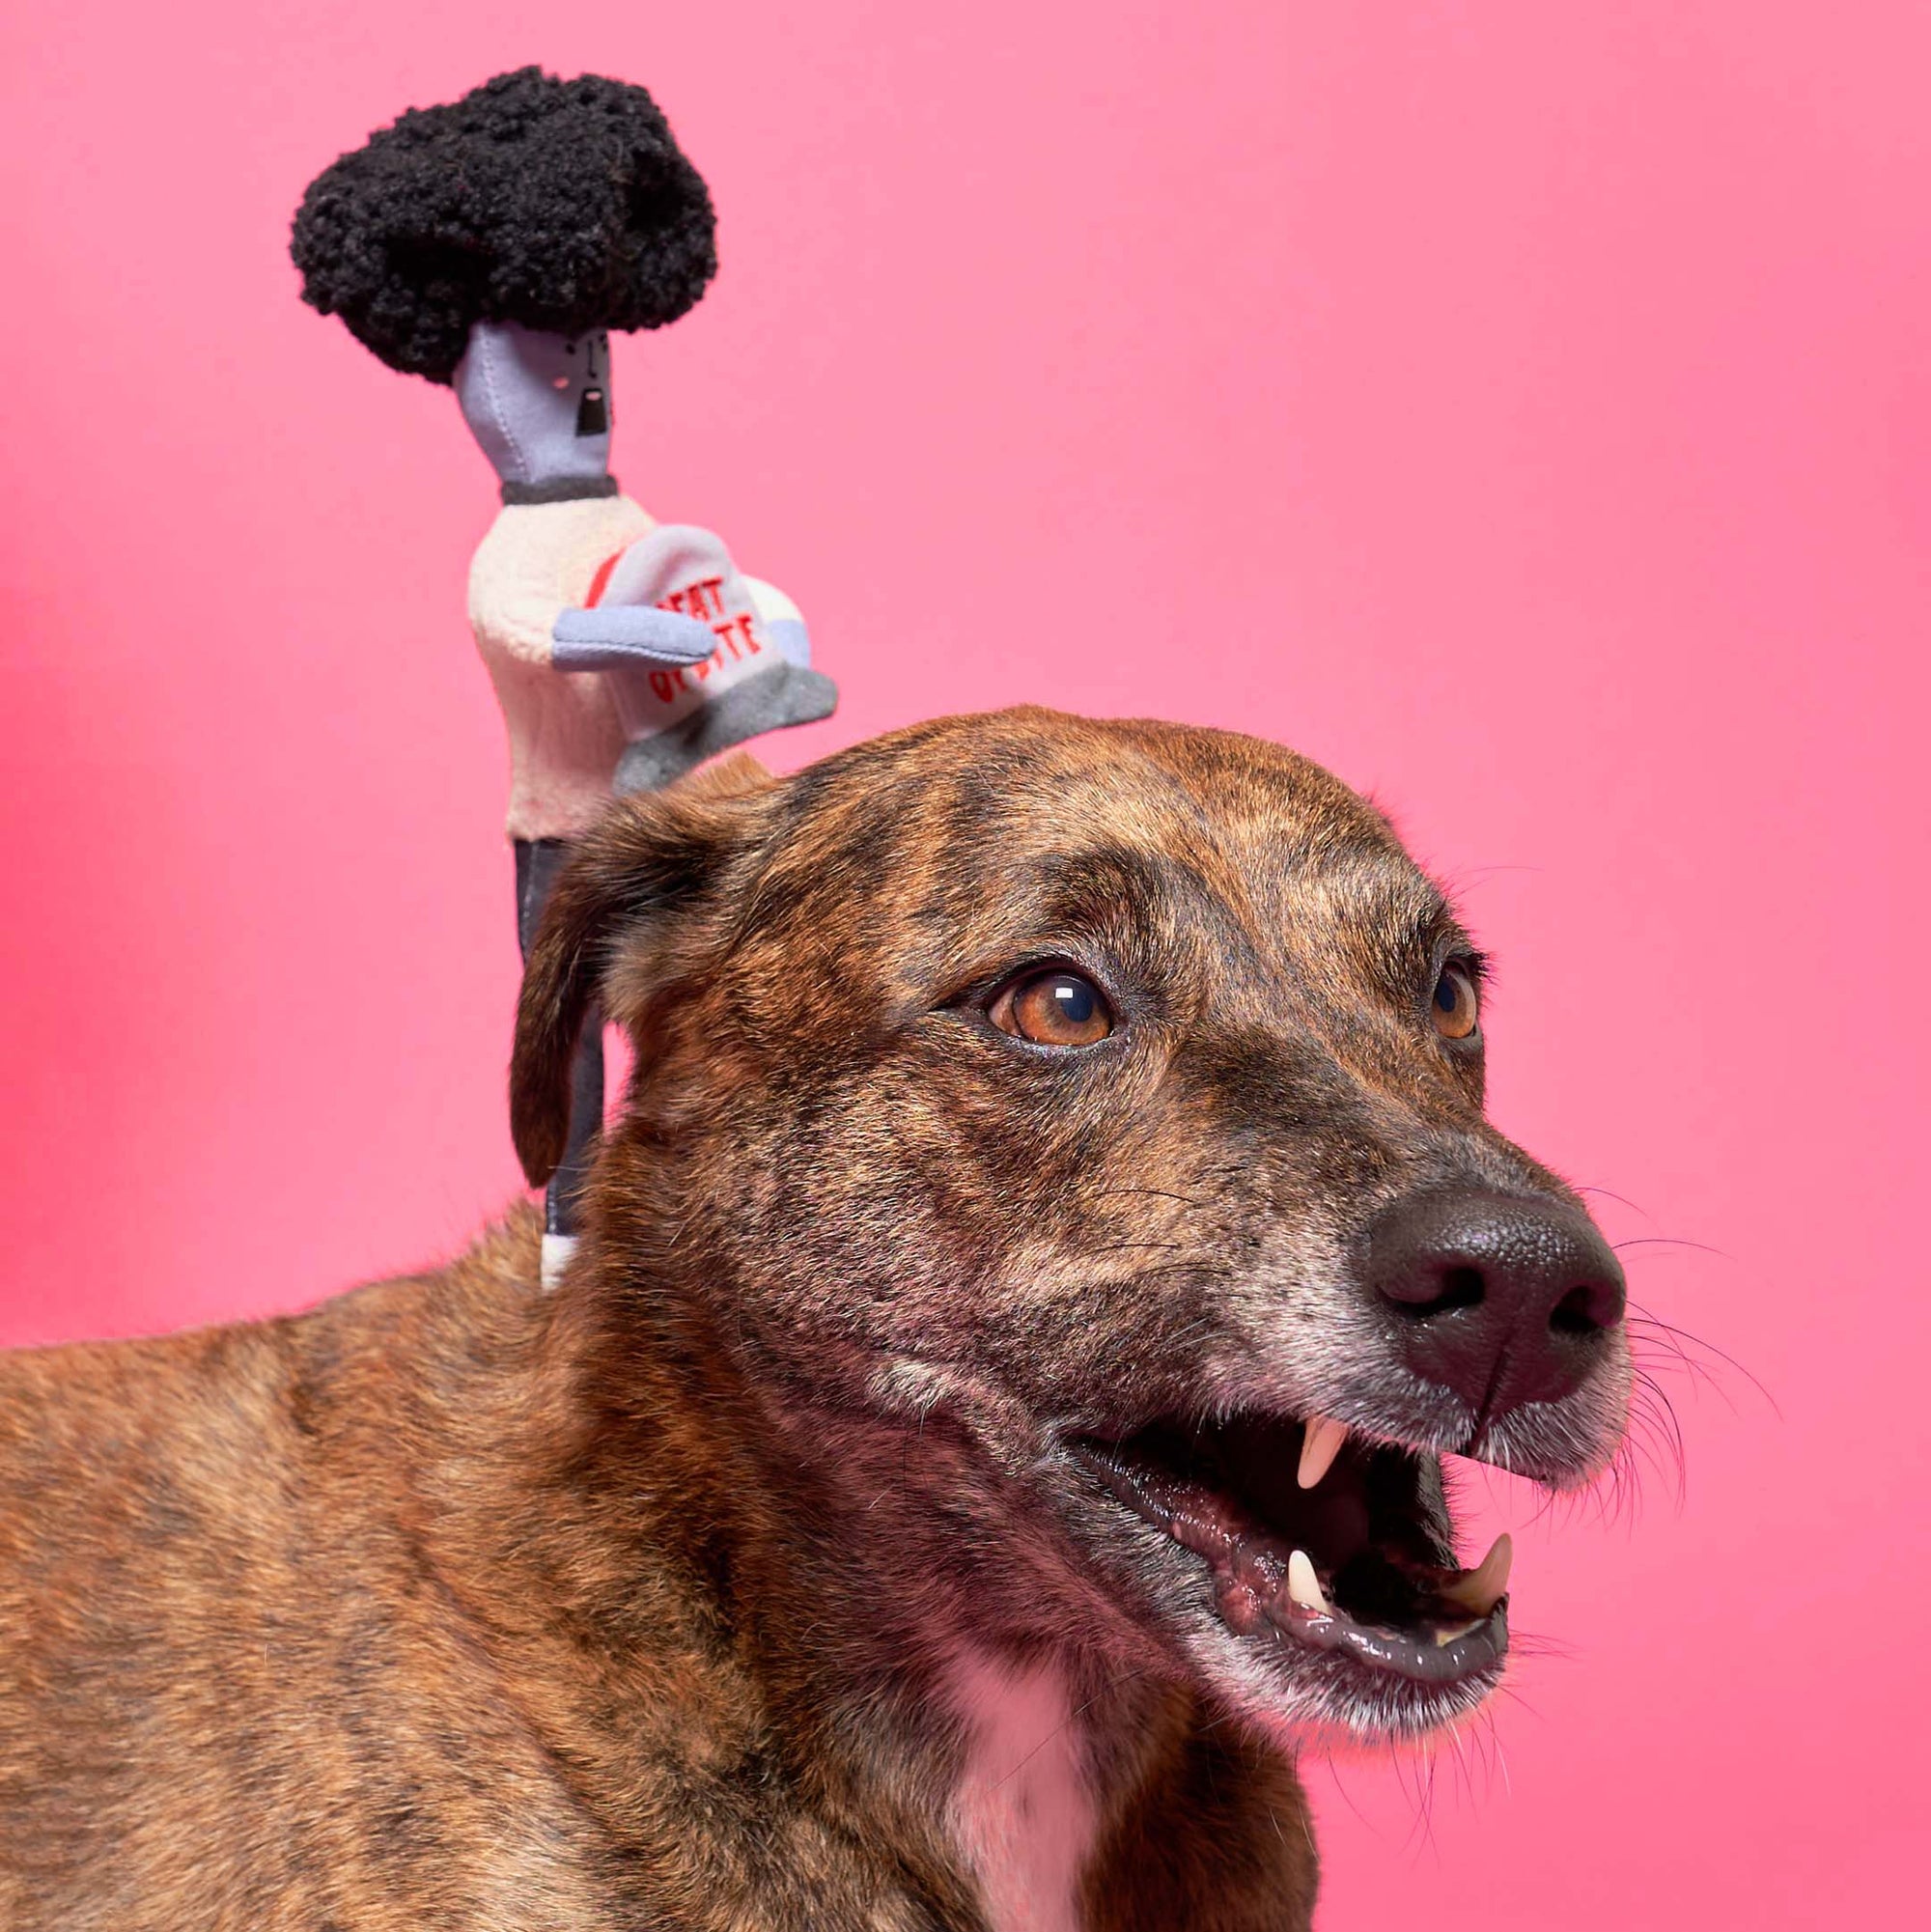 The photo captures a playful moment where a brindle dog appears to be happily interacting with a plush toy balanced on its head. The toy, designed with a zombie theme, includes a fluffy black hairdo and the phrase "TREAT OR BITE" across the torso. The bright pink background contrasts with the dog's coat and the toy's colors, emphasizing the lighthearted and humorous nature of the scene. The dog's open mouth and bright eyes suggest excitement and engagement with the toy.